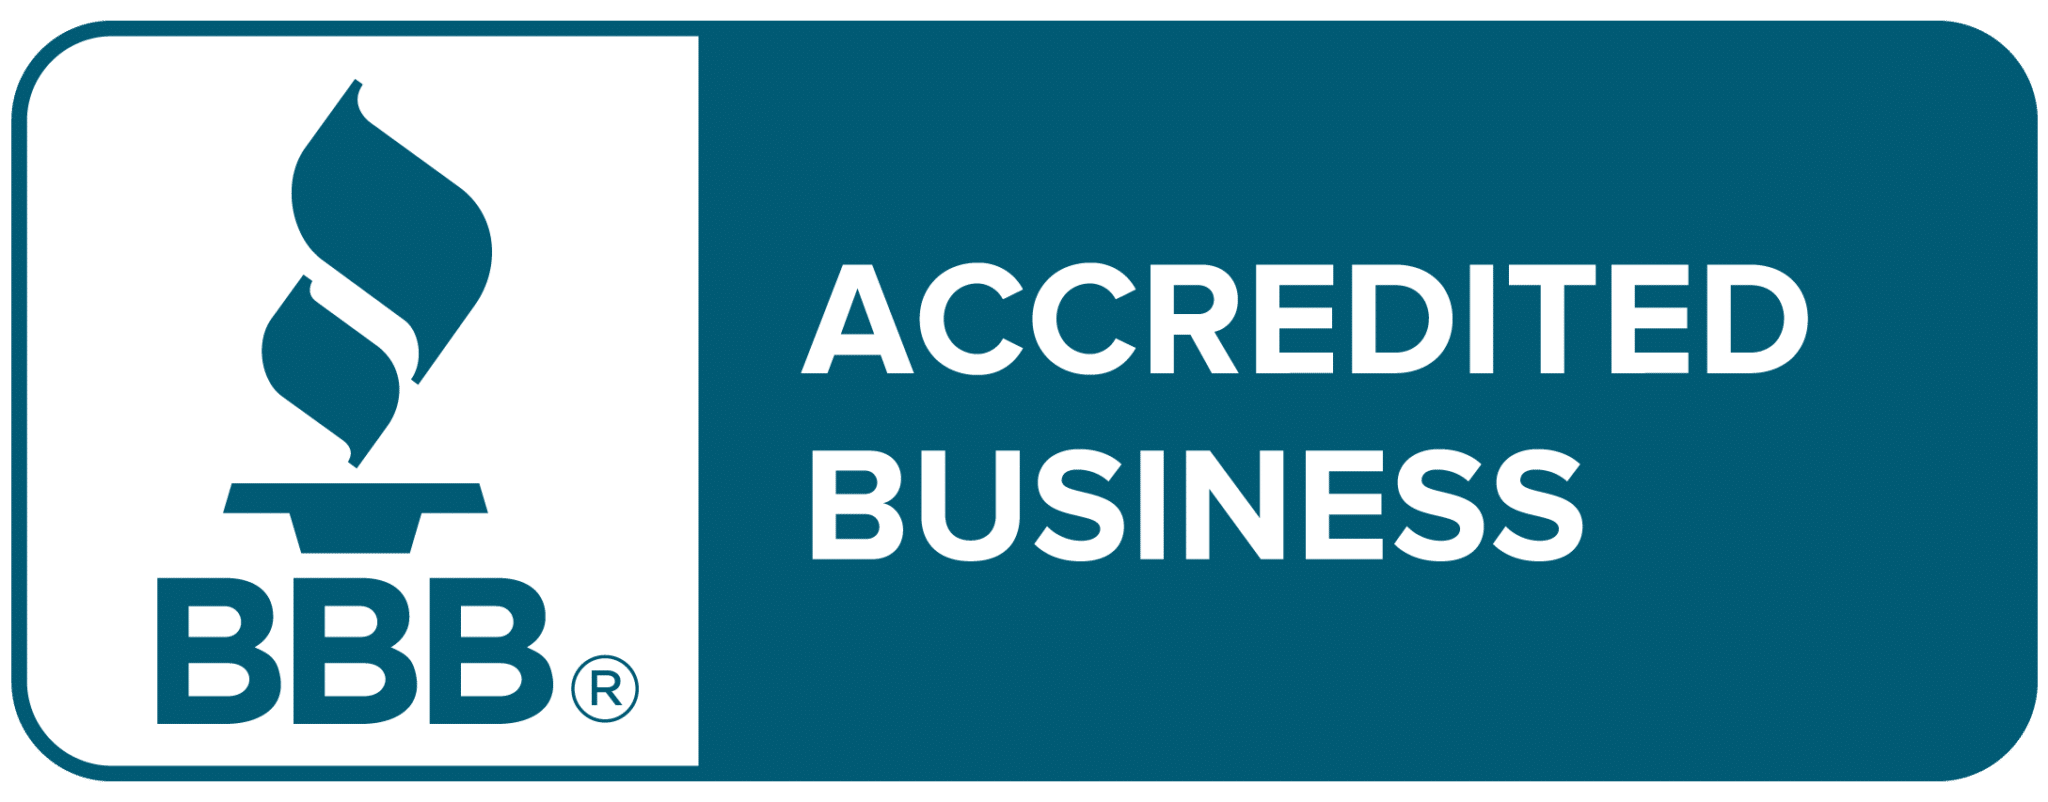 The BBB Accredited Business logo